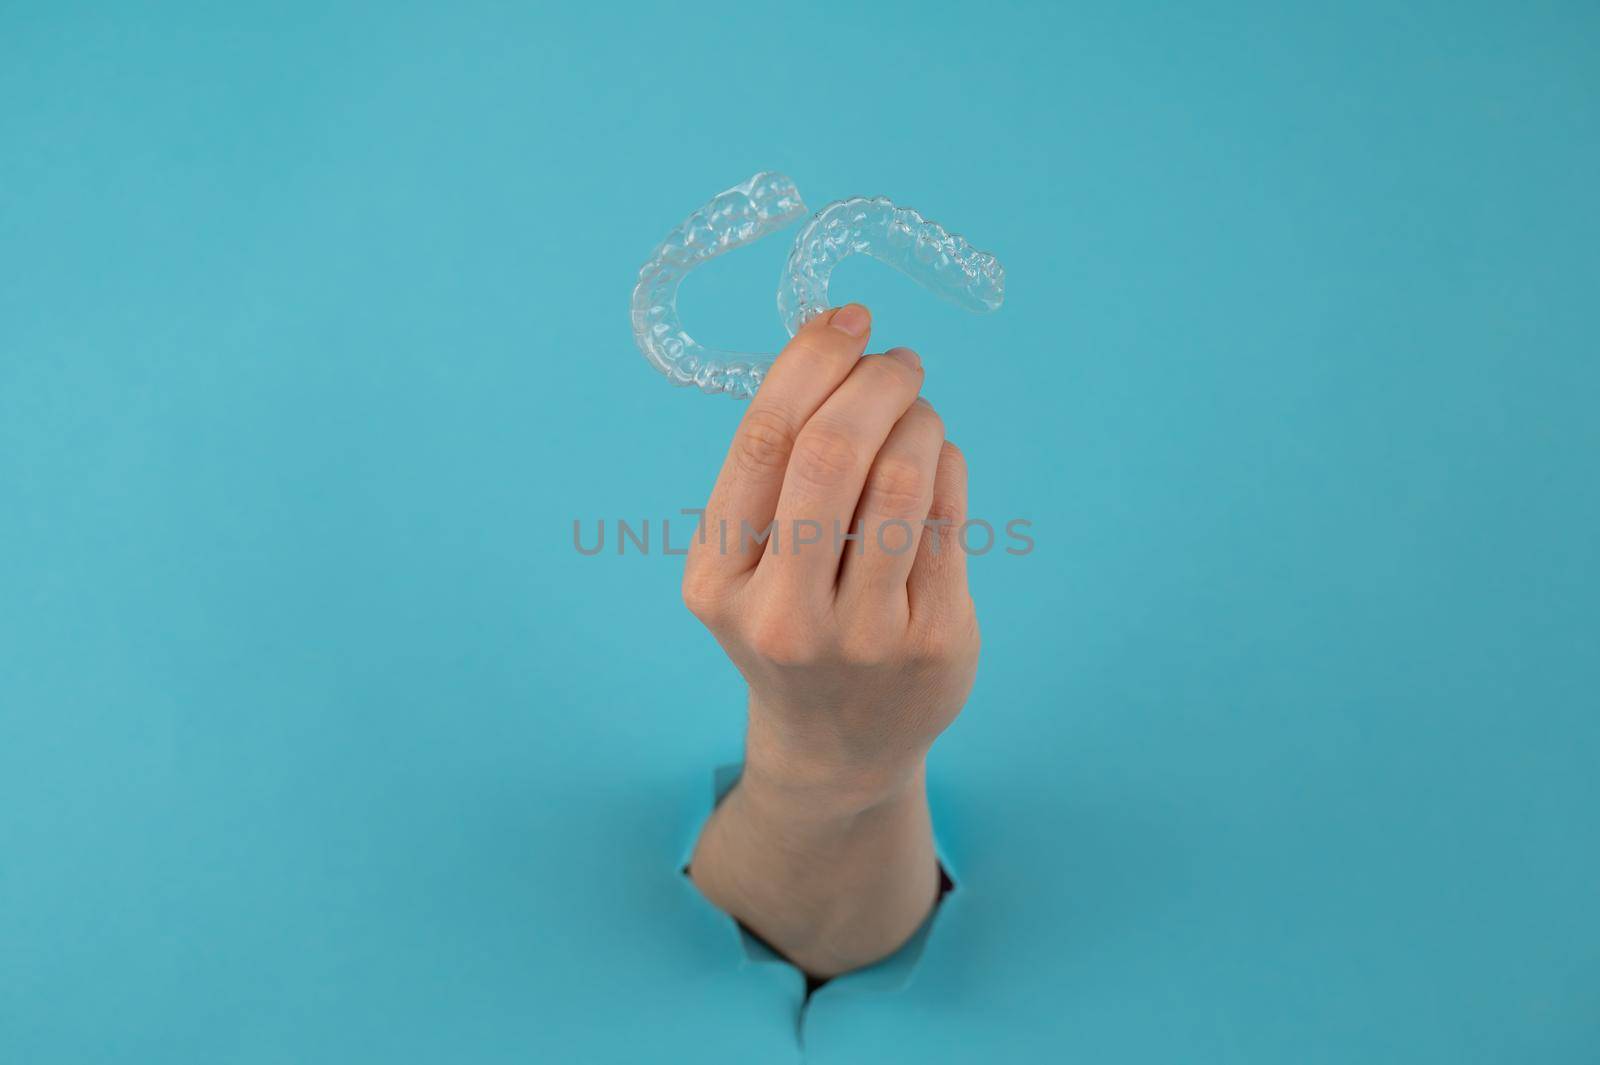 A female hand sticking out of a hole from a blue background holds removable night retainers